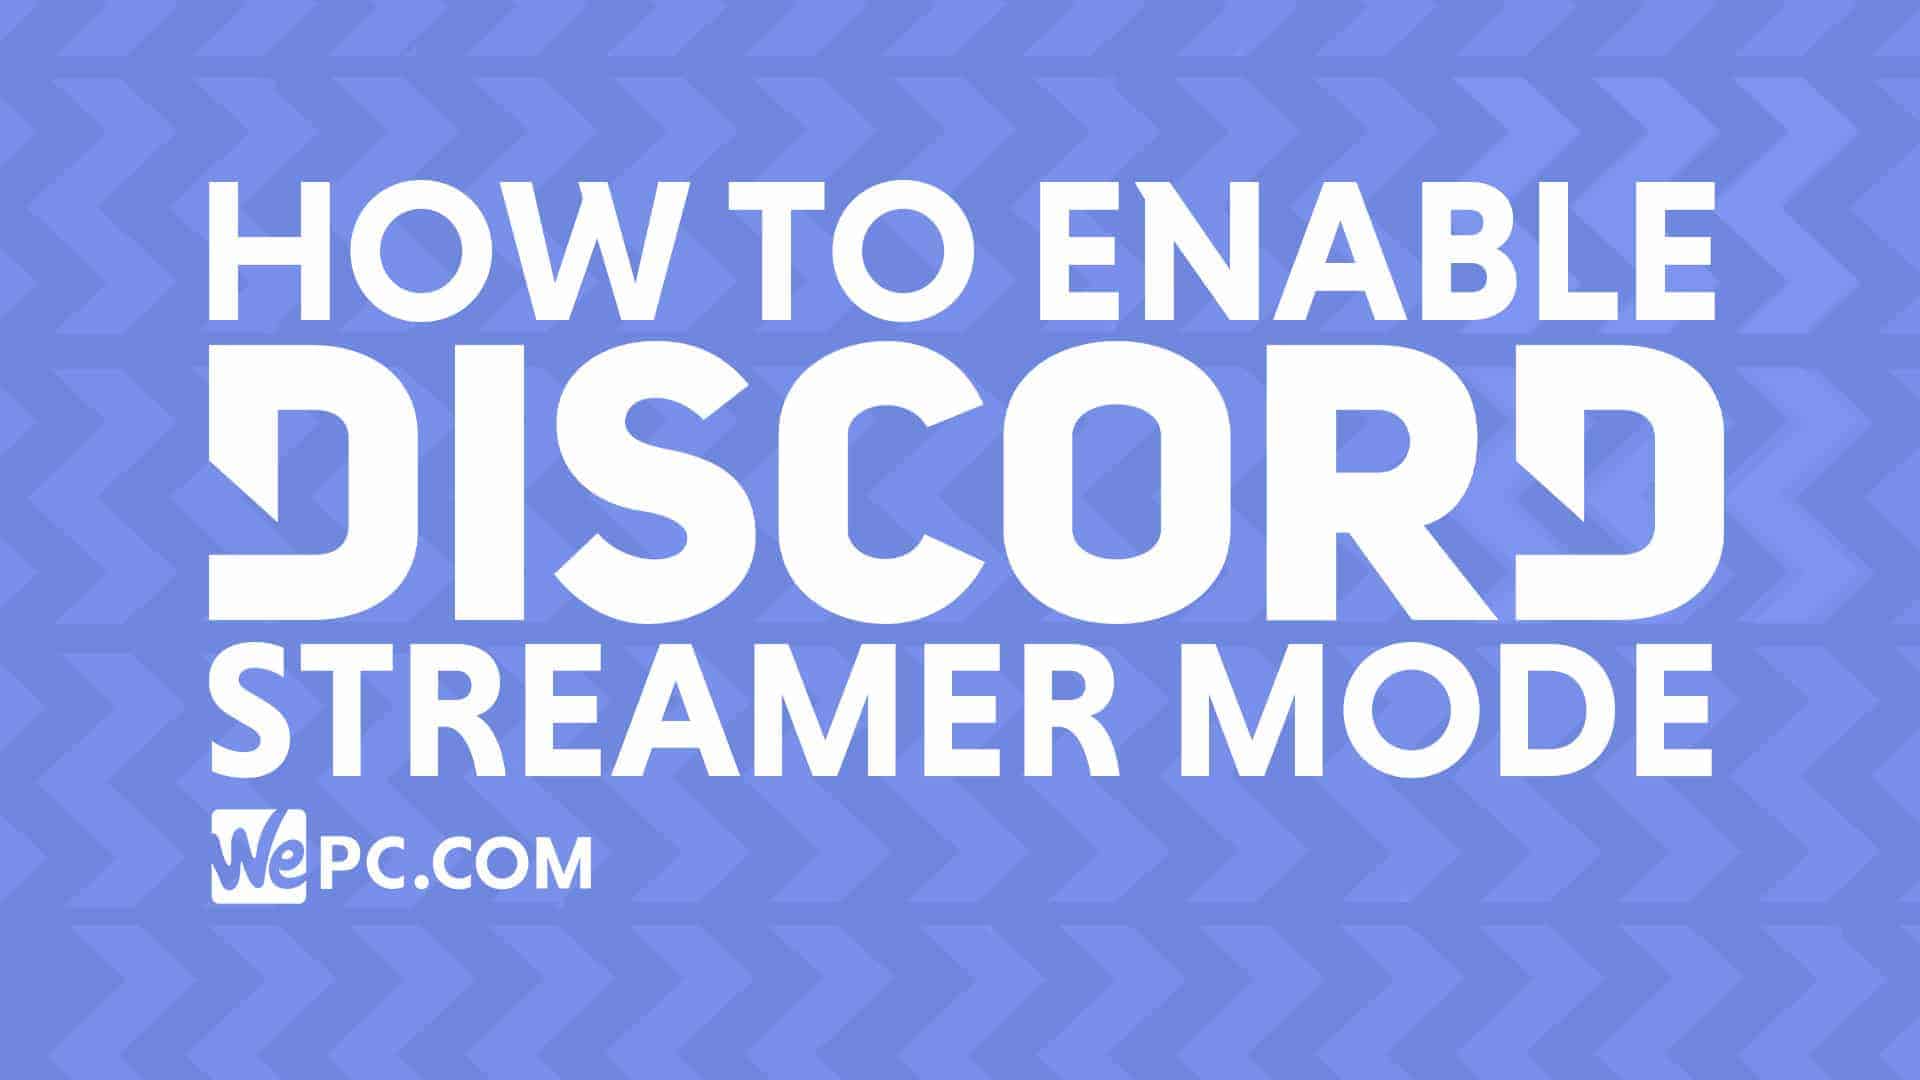 Discord Integration: A guide on using Discord through Roblox